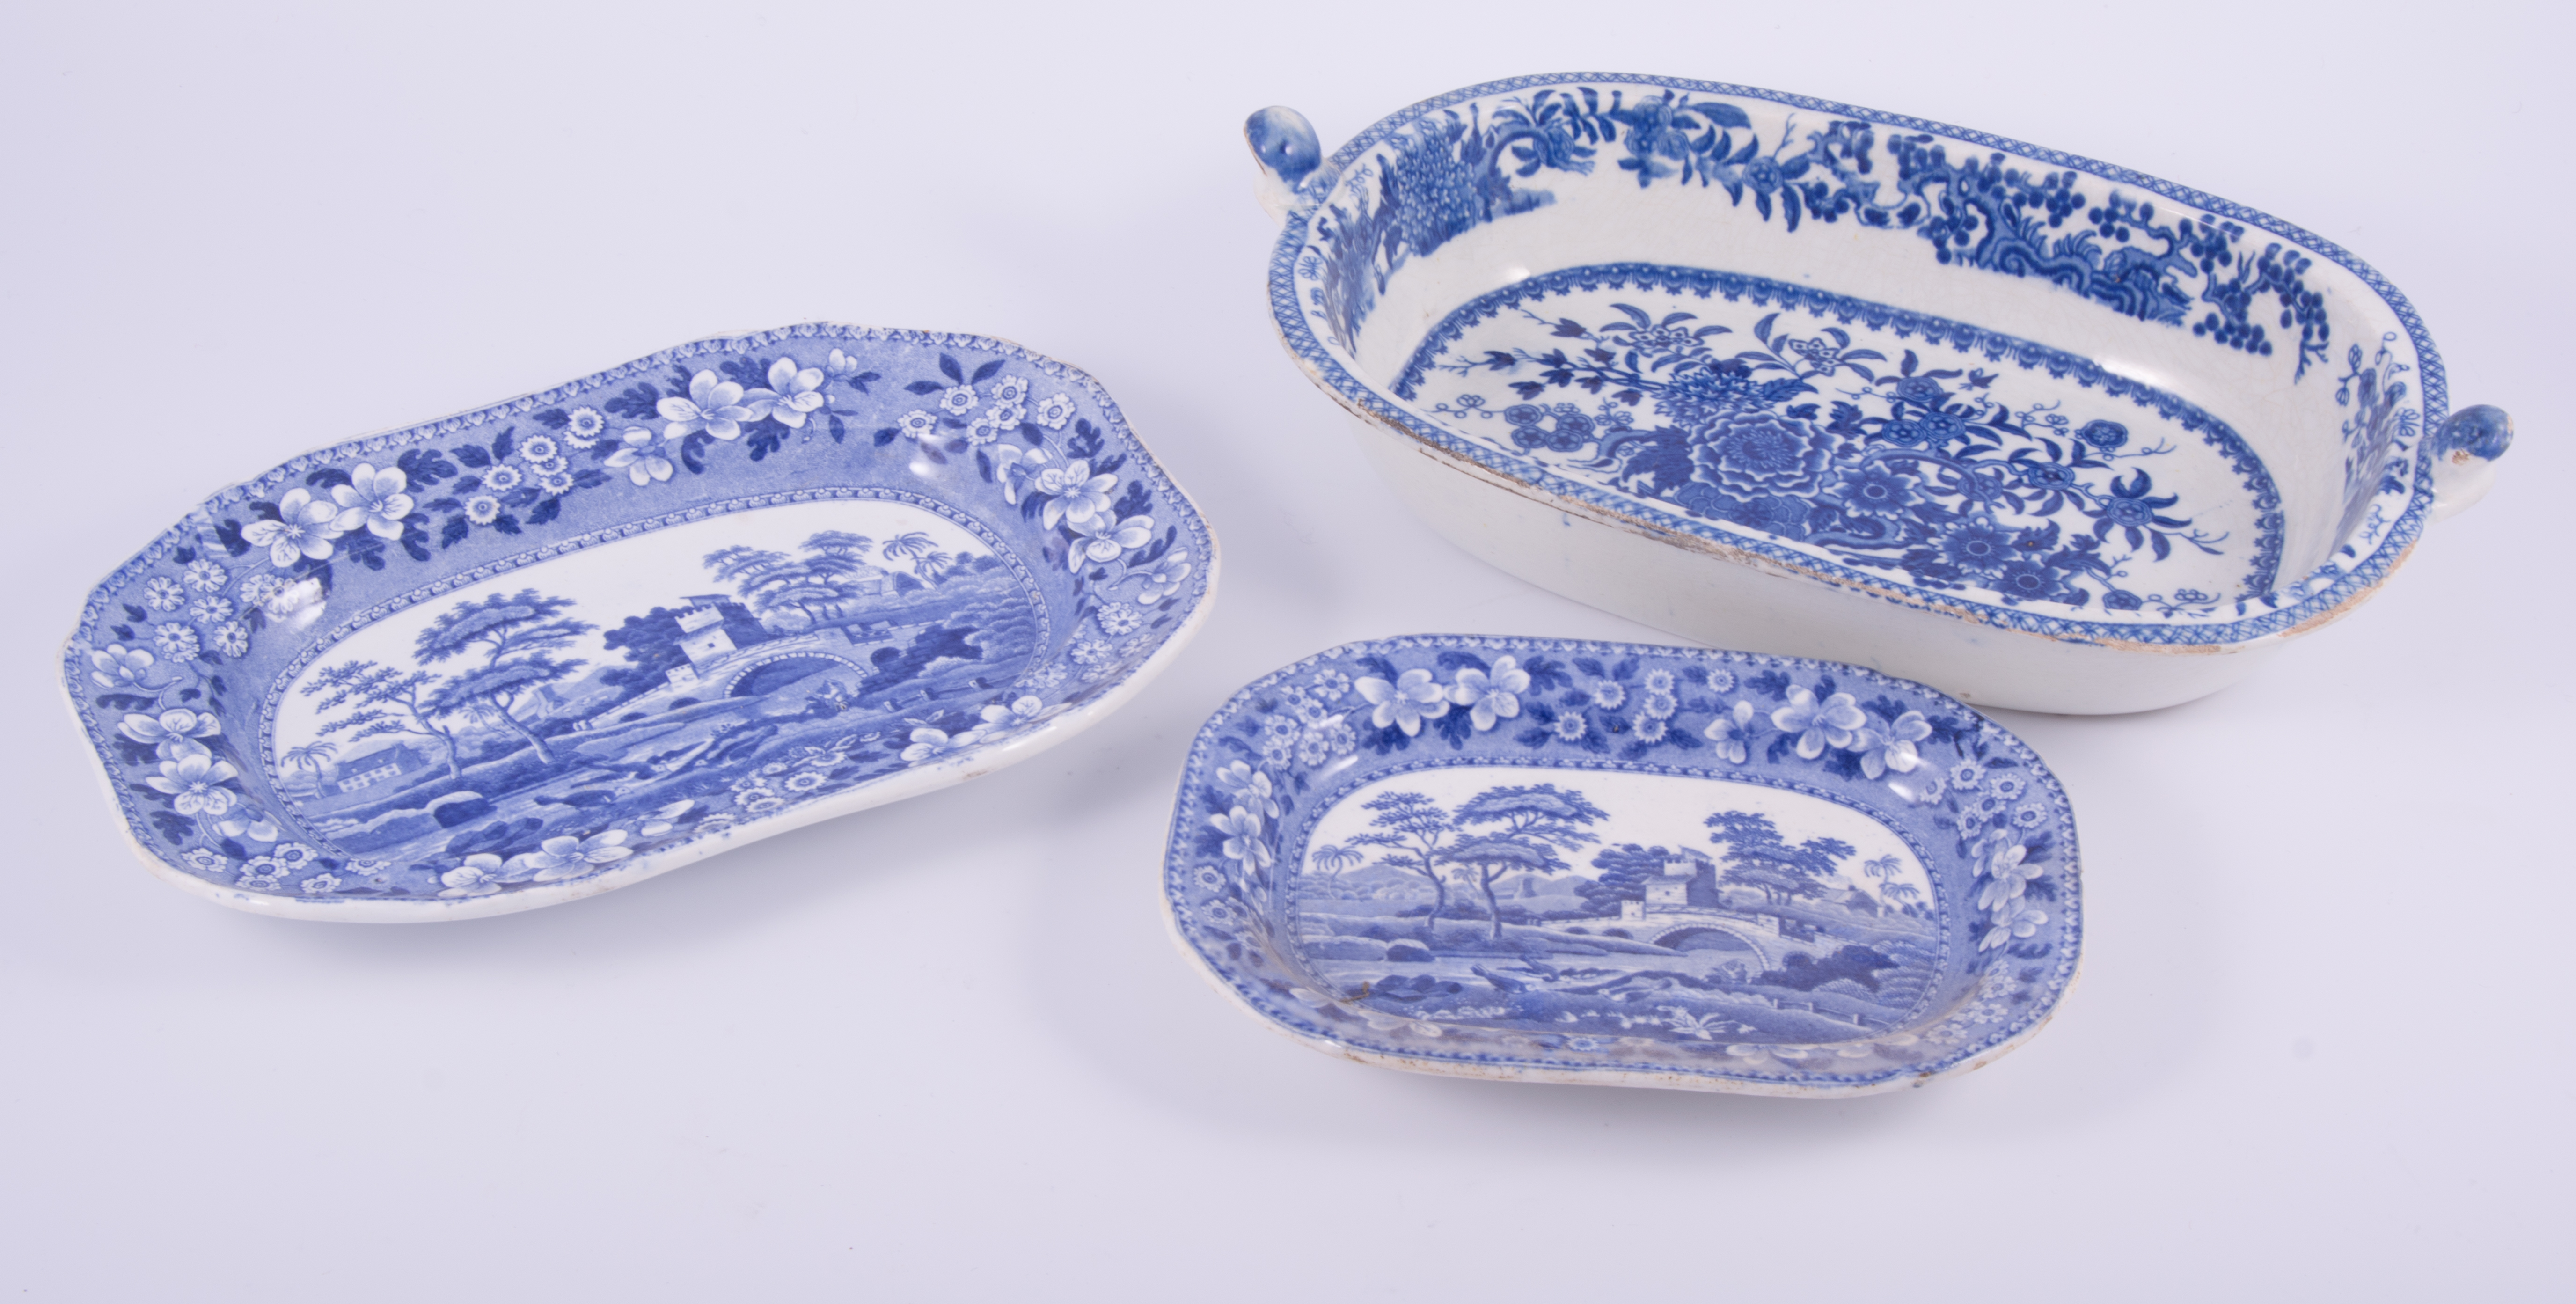 A pair of Staffordshire blue transfer printed oval plates, Monopeteros, John Rogers, - Image 2 of 2